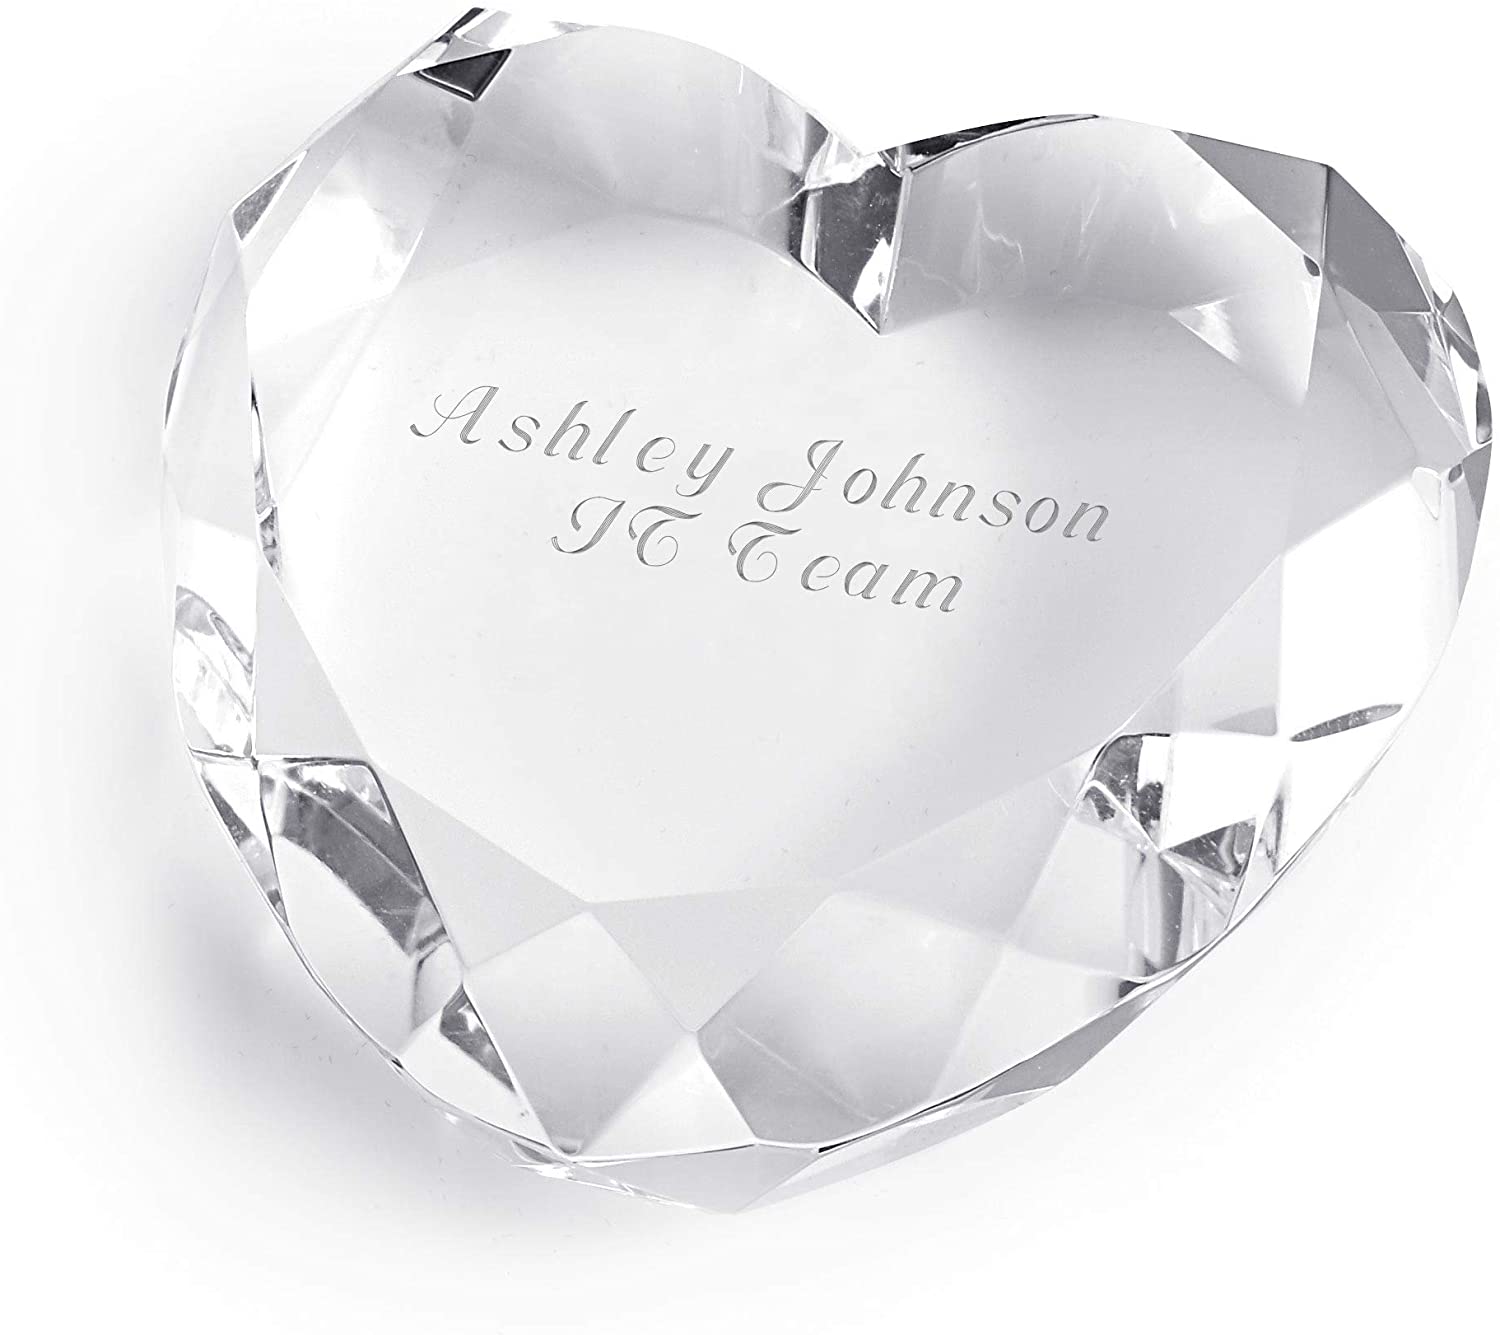 Things Remembered Personalized Clear Crystal Heart Shaped Paperweight with Engraving Included